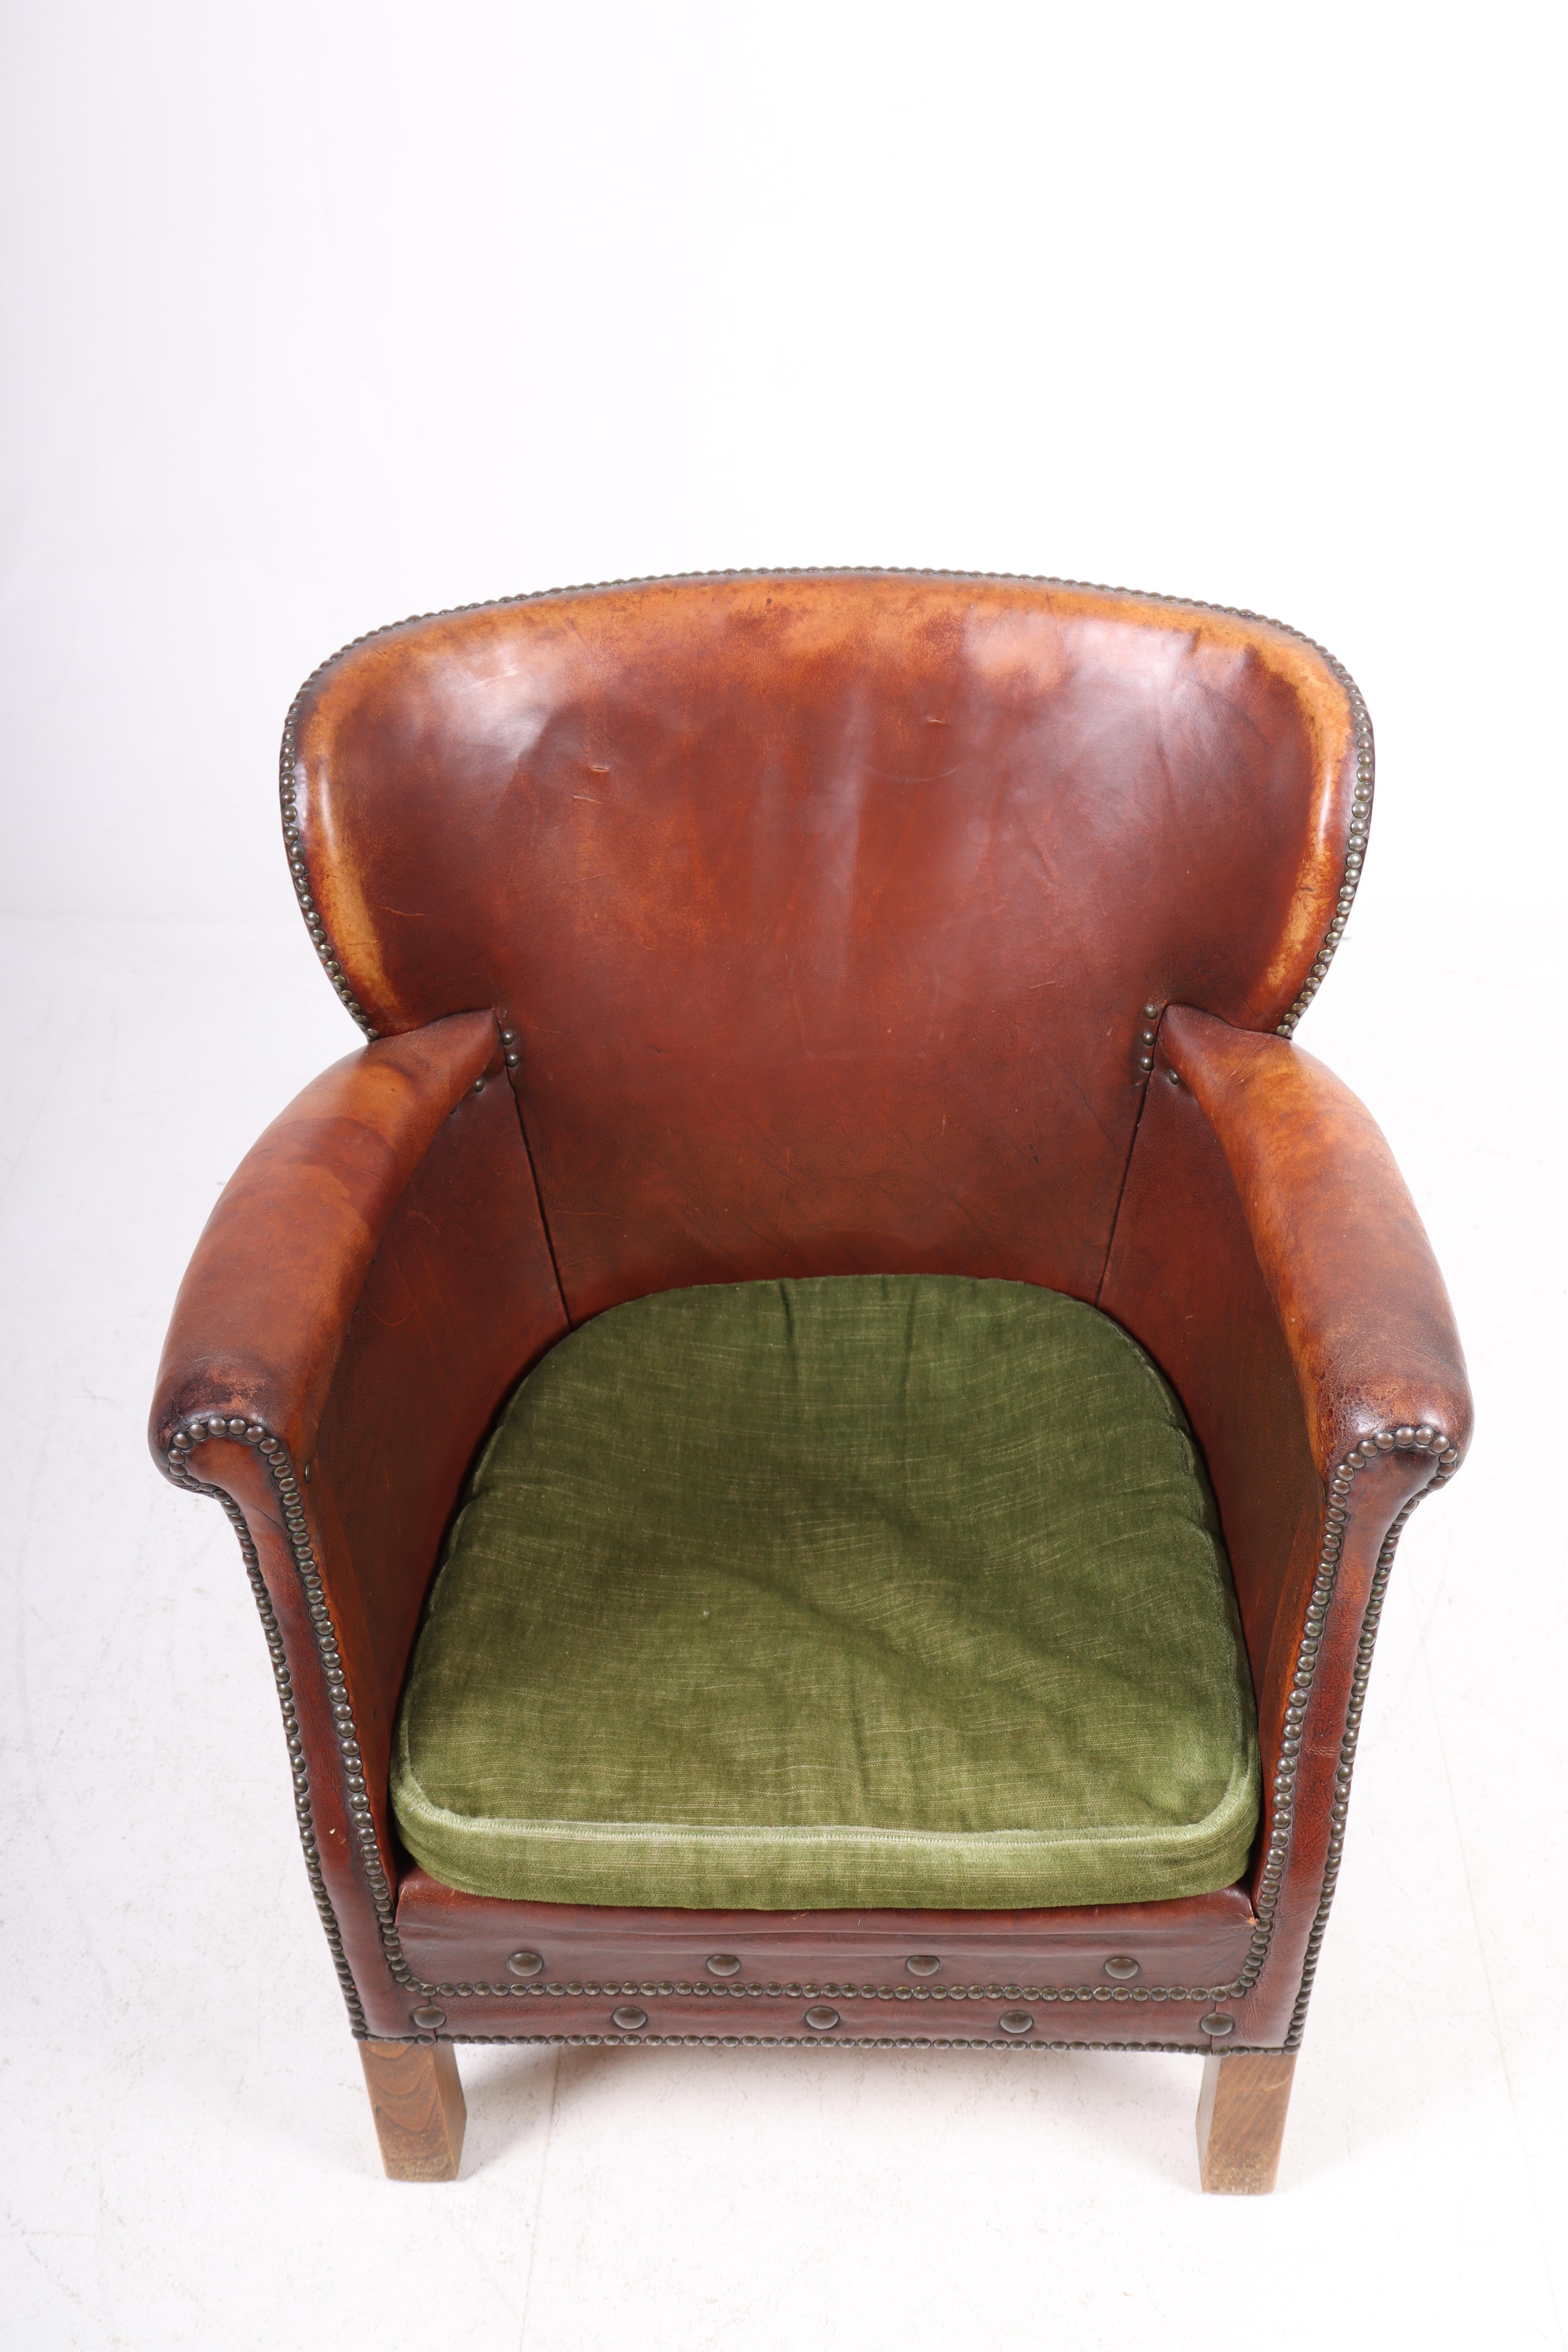 Lounge chair in leather and fabric. Designed and made in Sweden. Original condition.